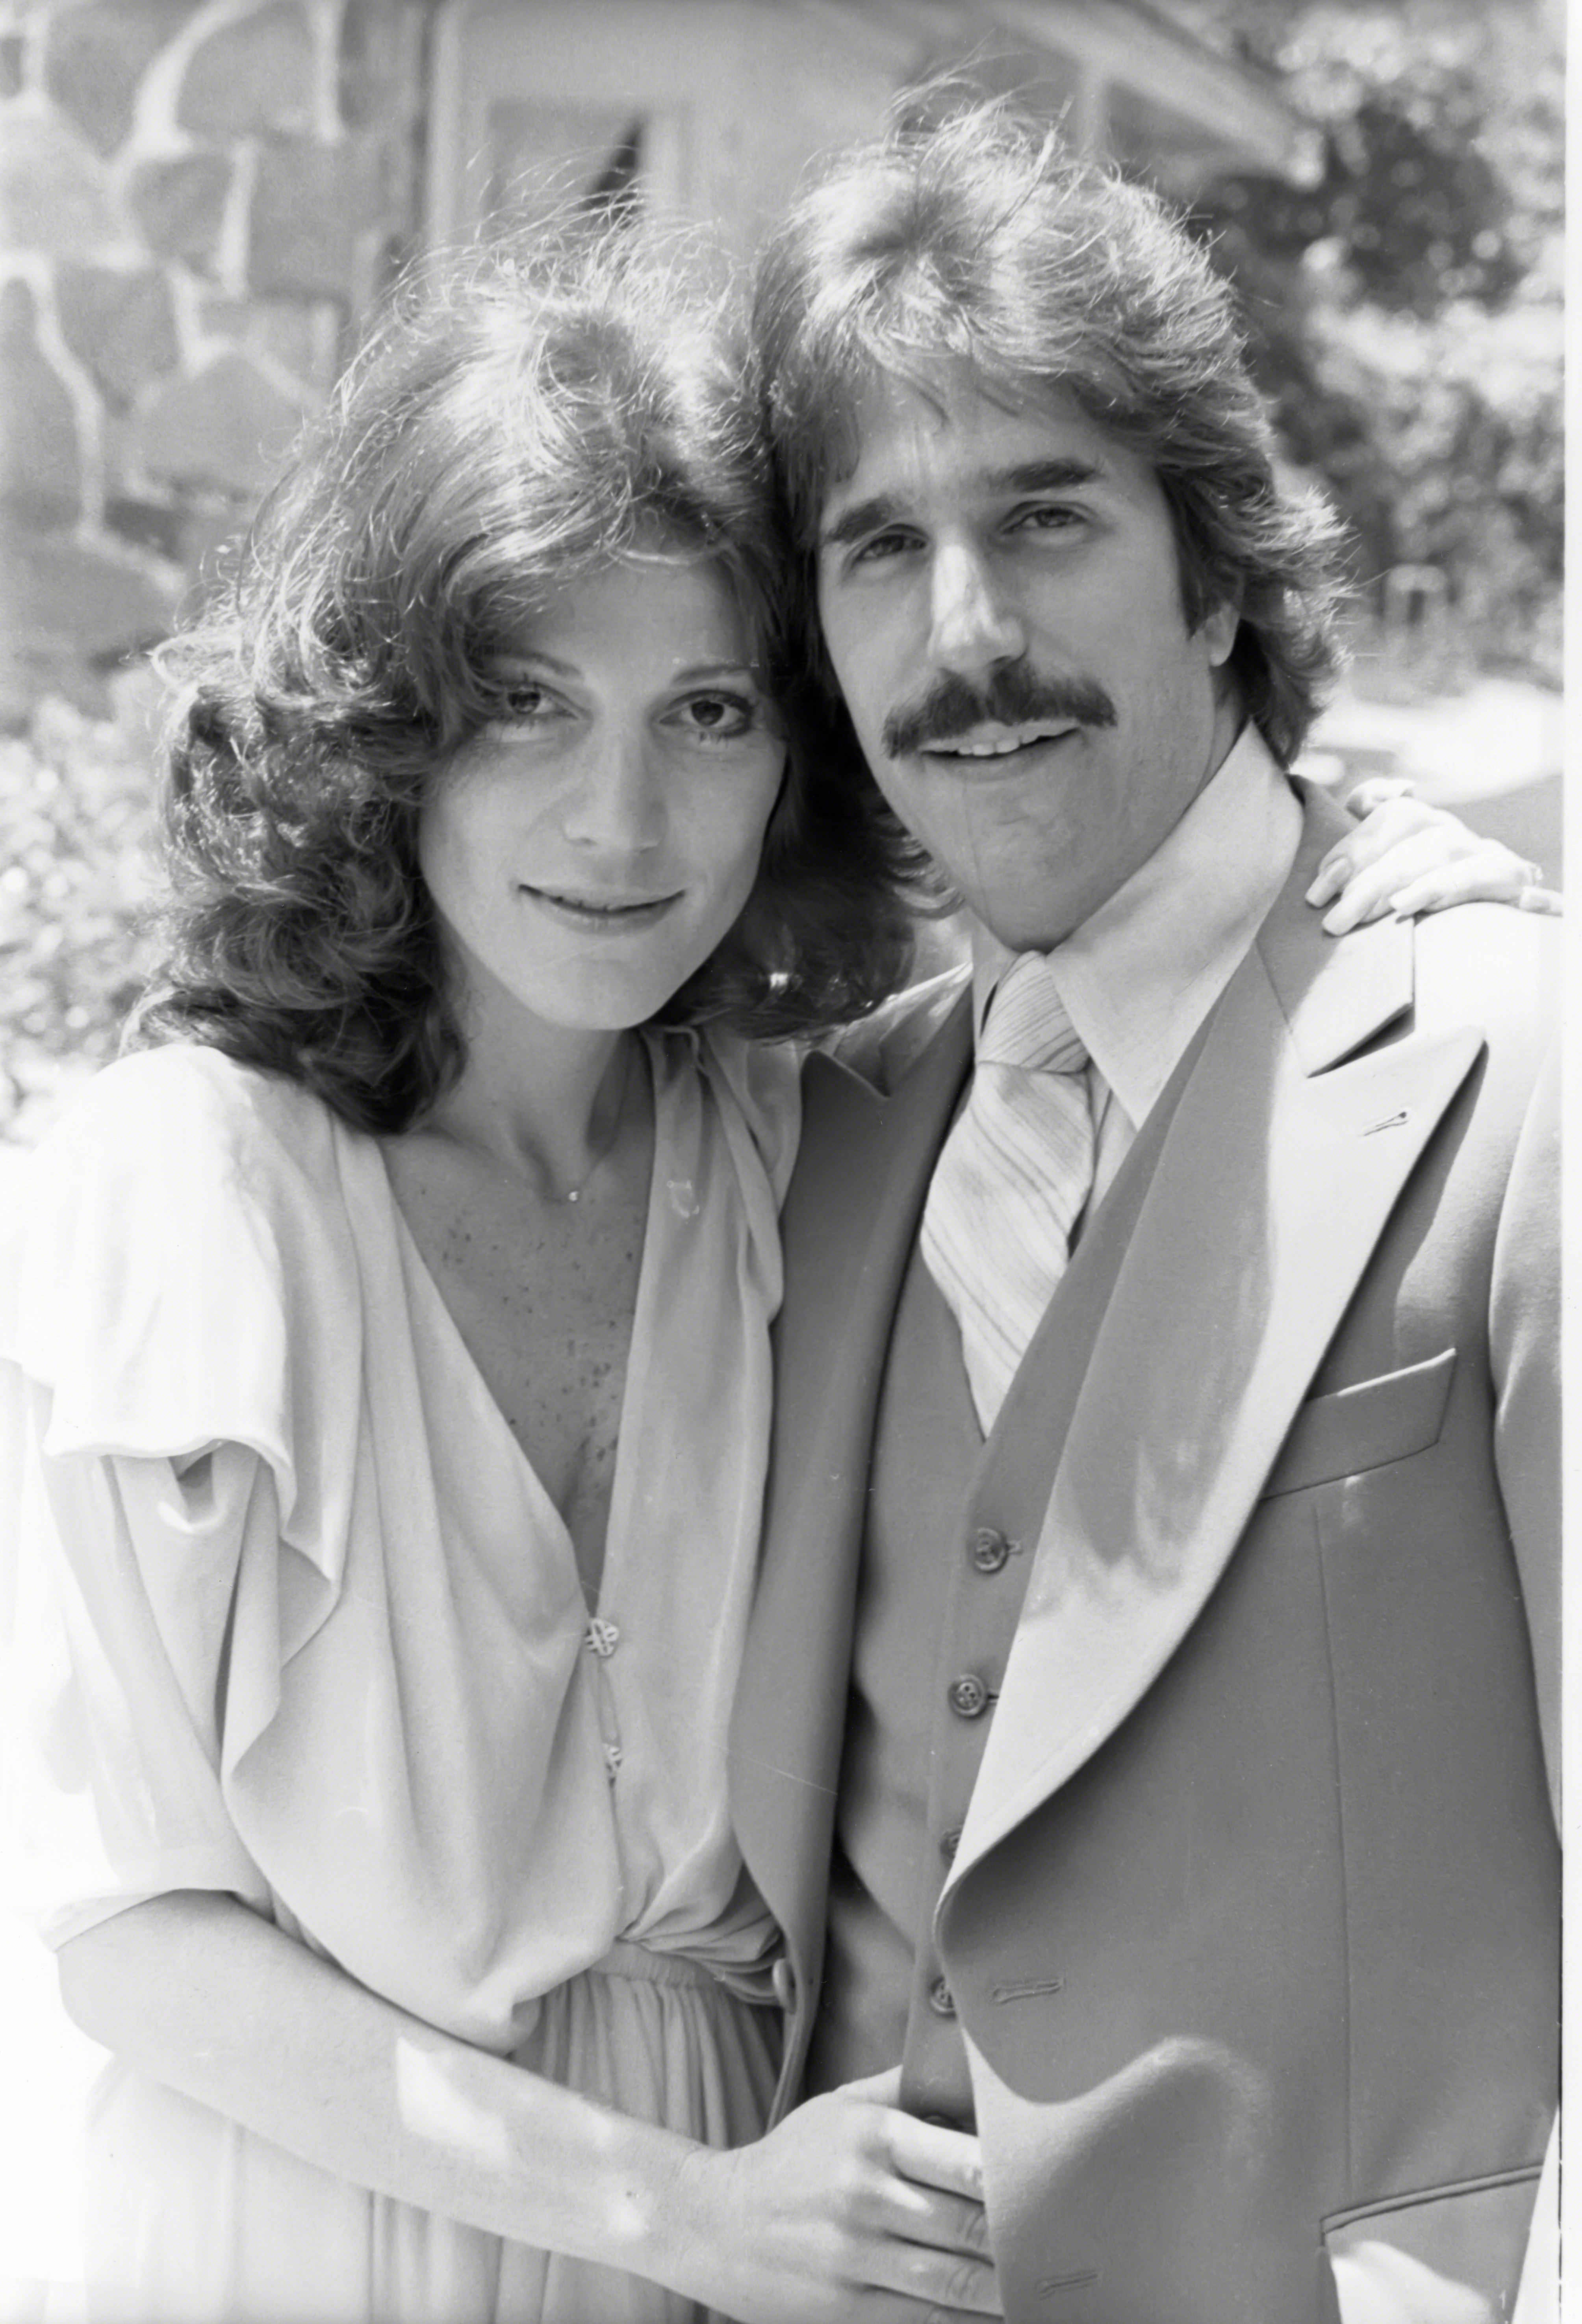 Henry Winkler and Stacey Weitzman, circa 1970s | Source: Getty Images